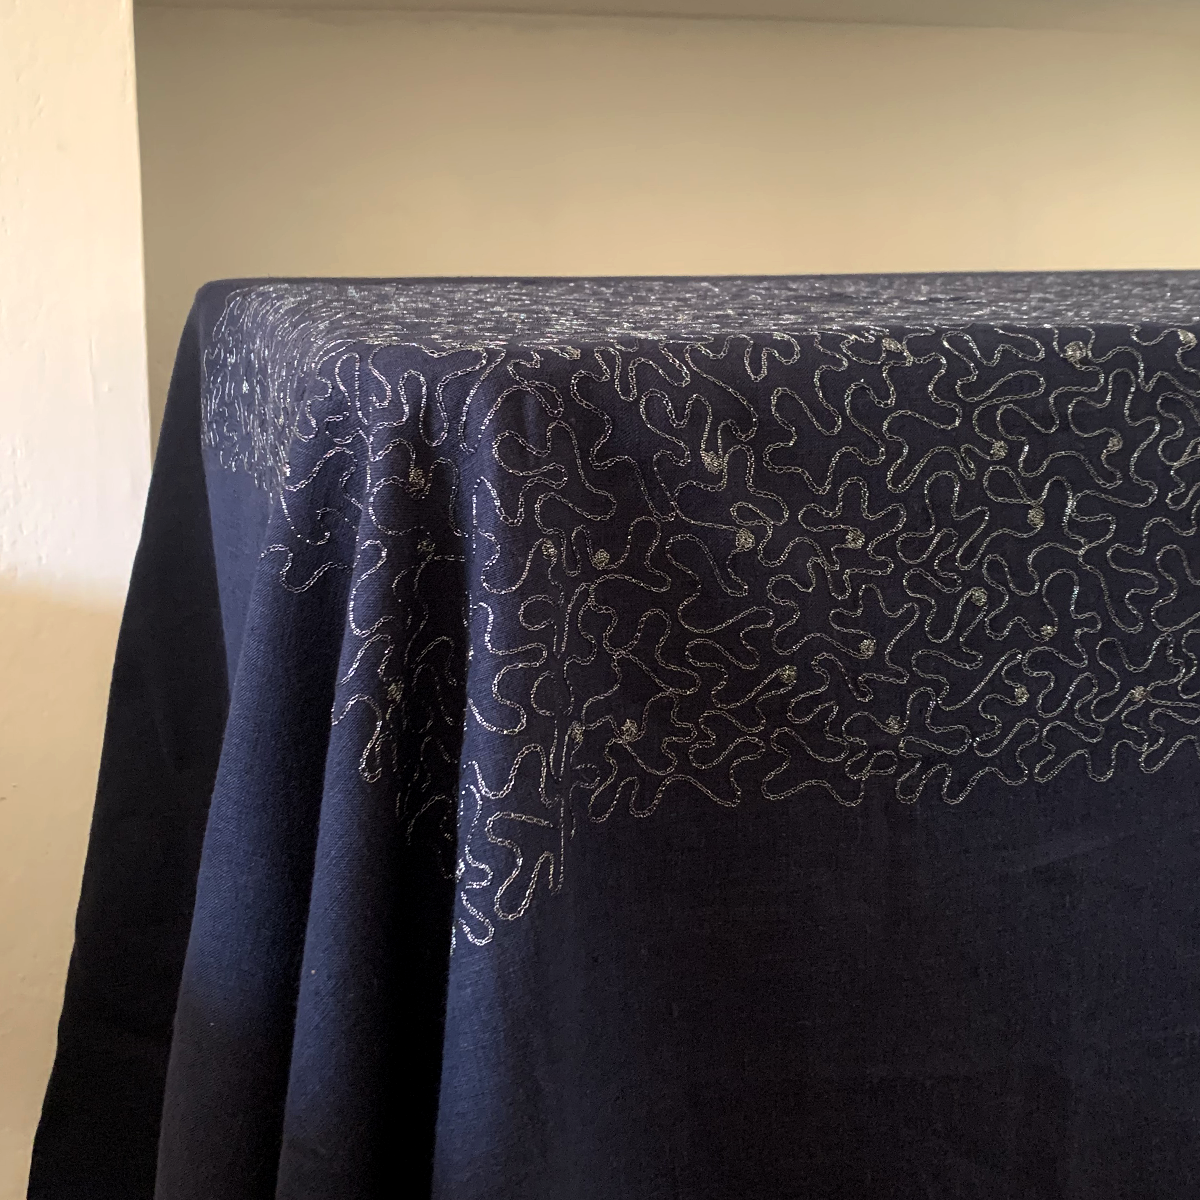 Starry Night: Navy Blue Tablecloth with Intricate Embroidery